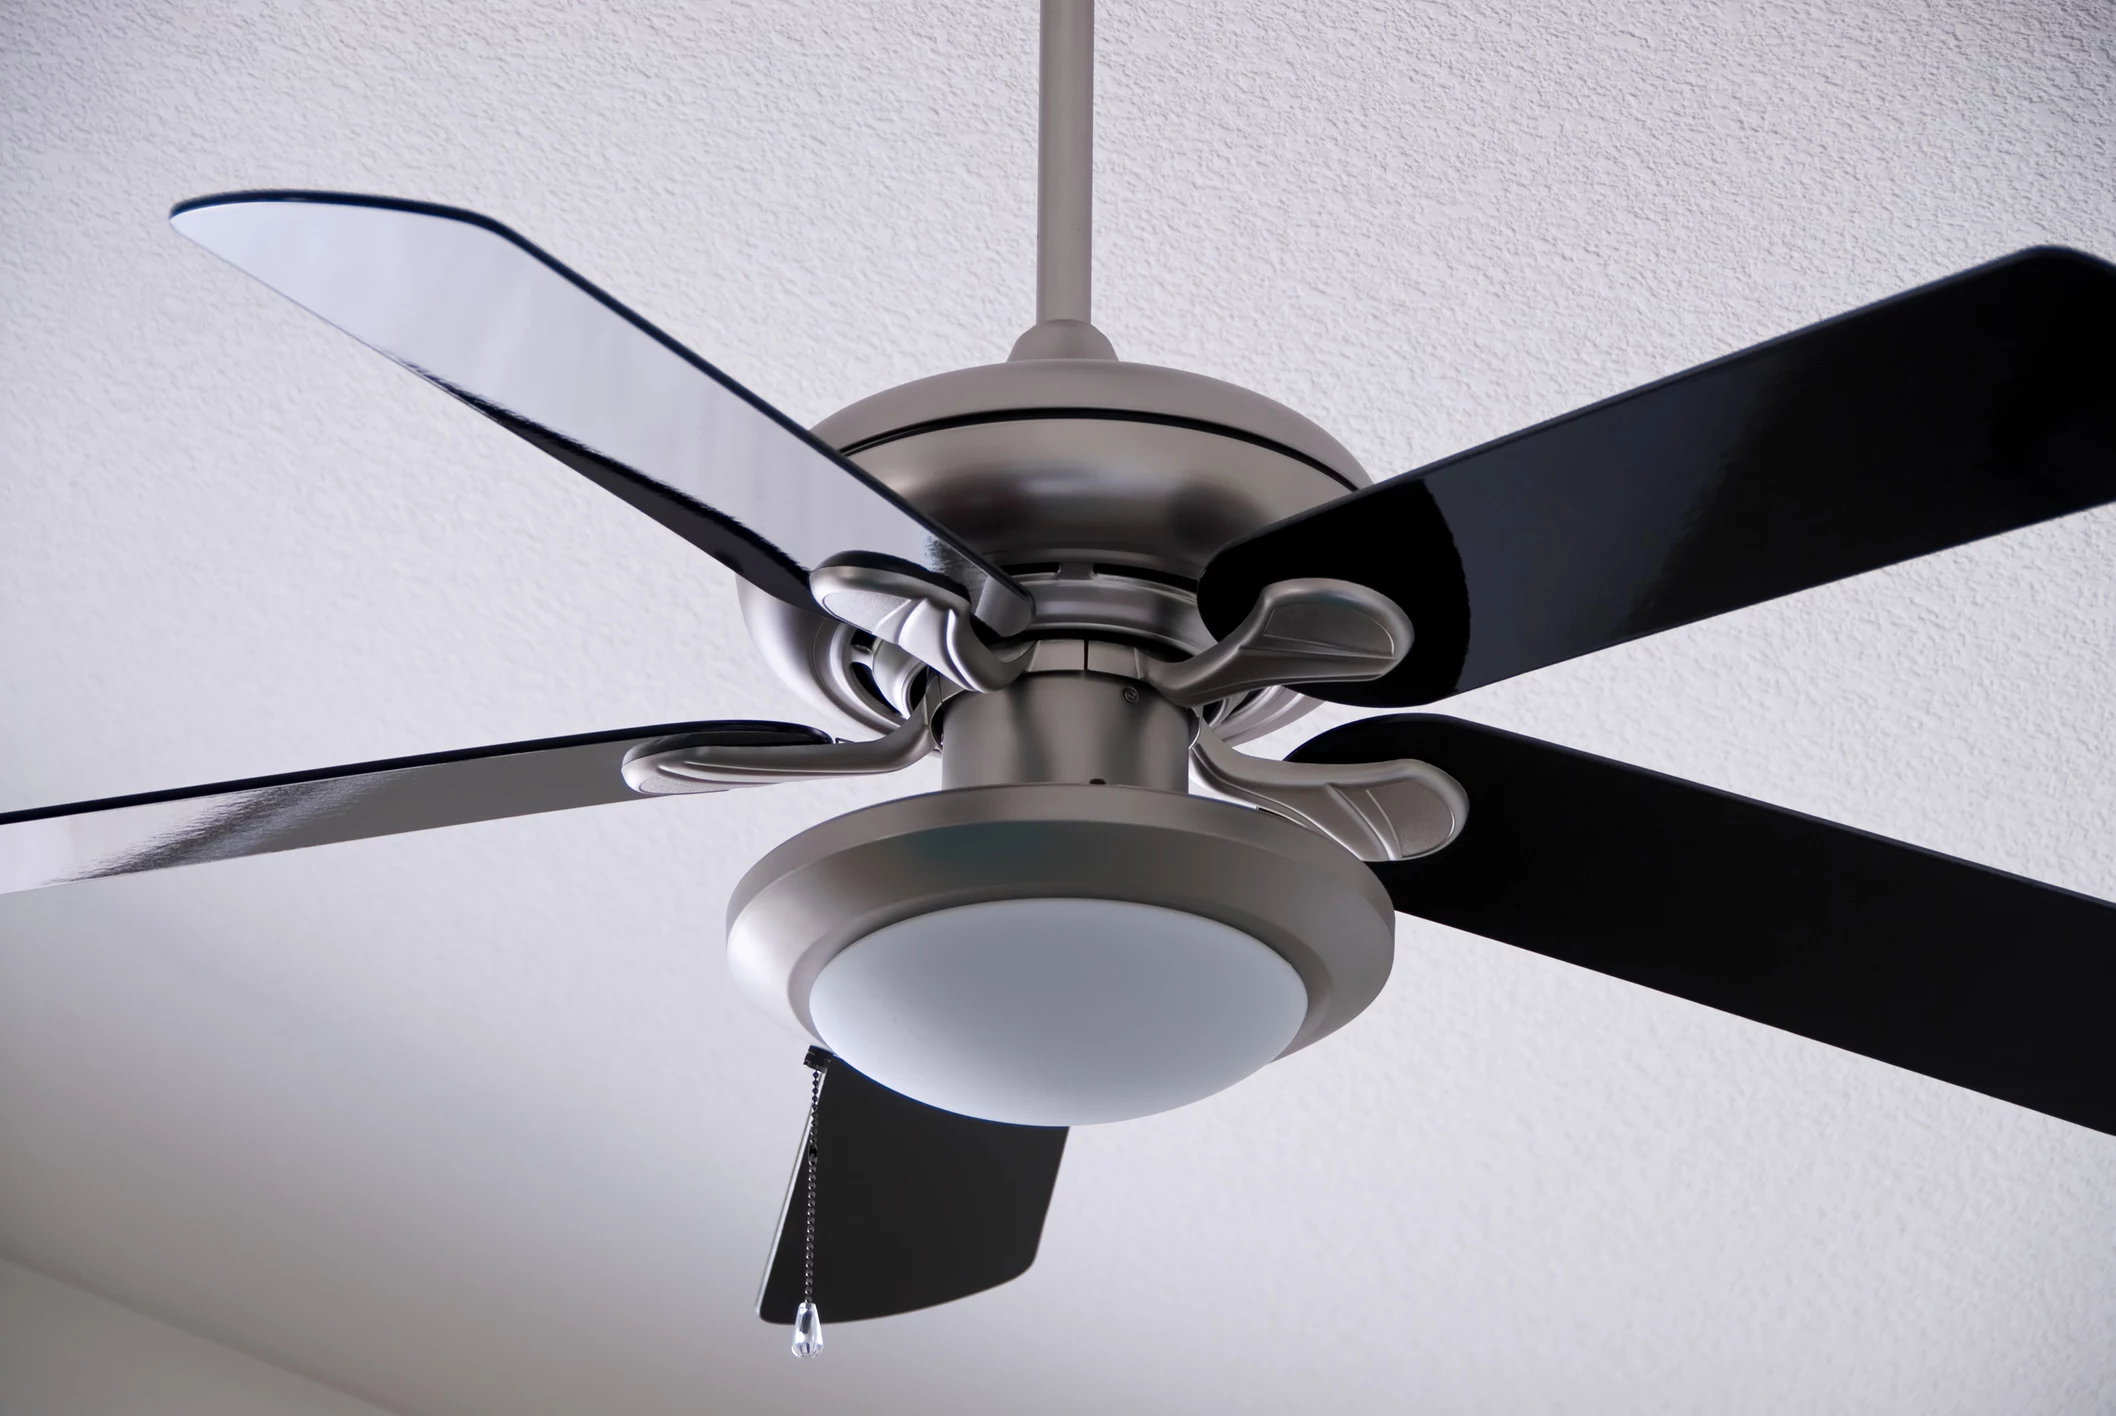 The World Is Realizing Their Ceiling Fans Have Hot & Cold Switch